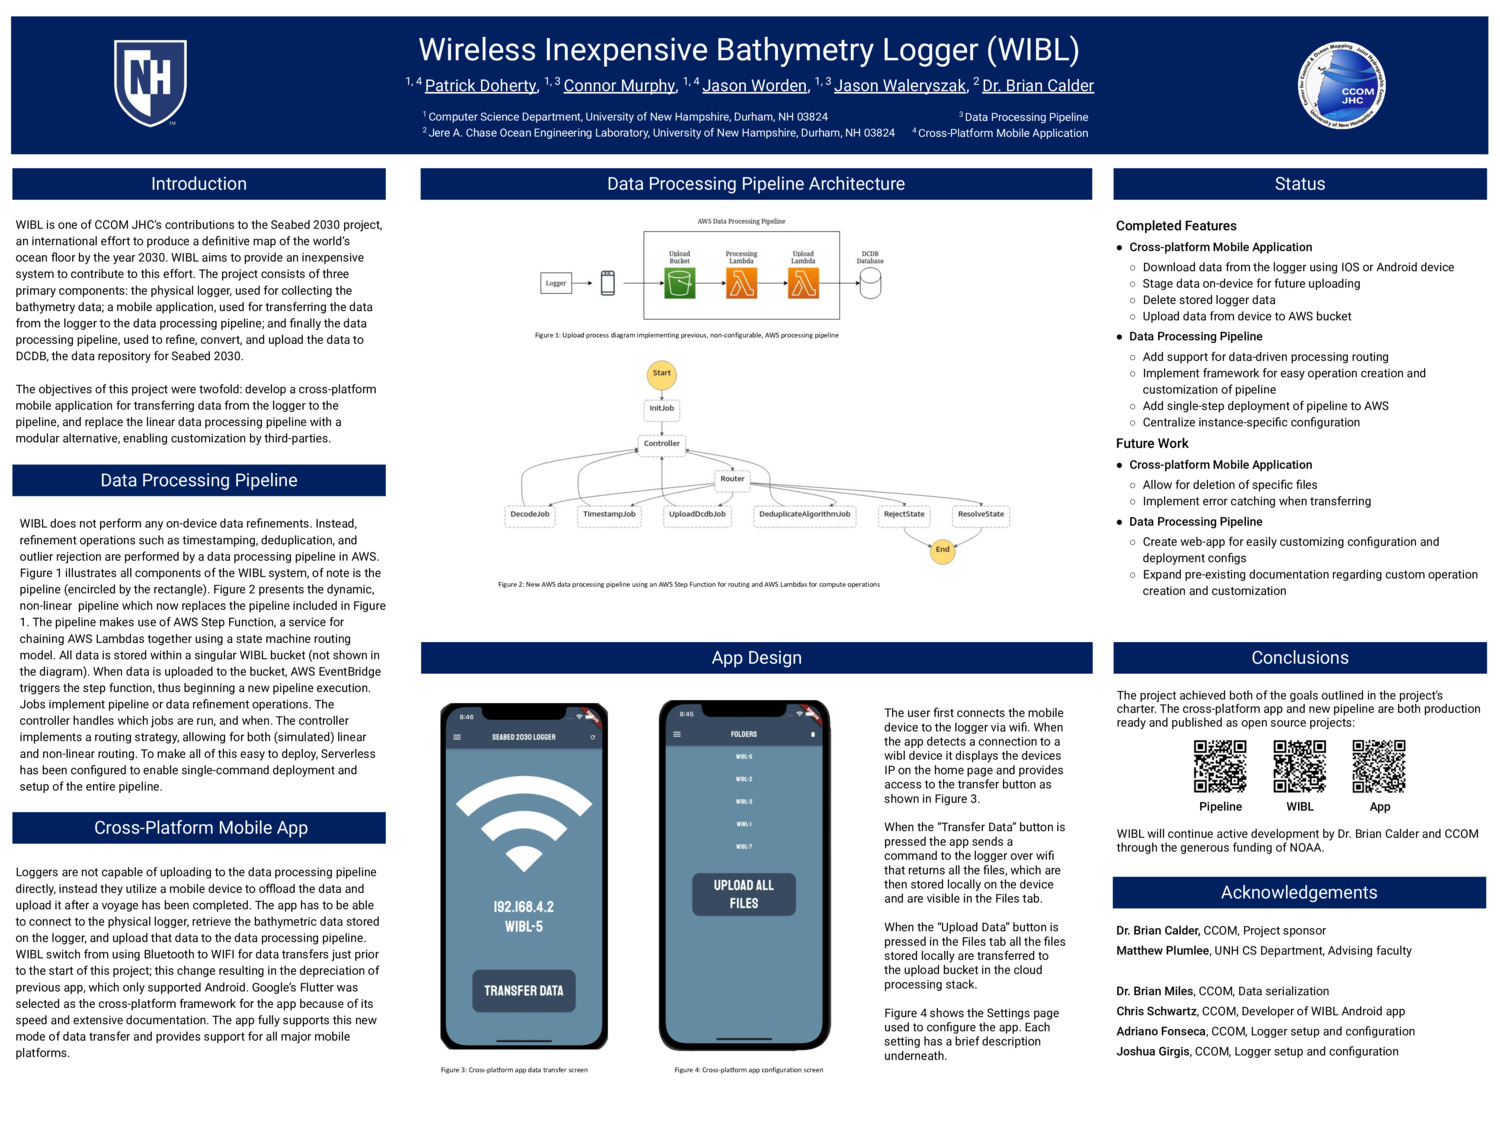 Wibl (Wireless Inexpensive Bathymetry Logger) by jaw1042